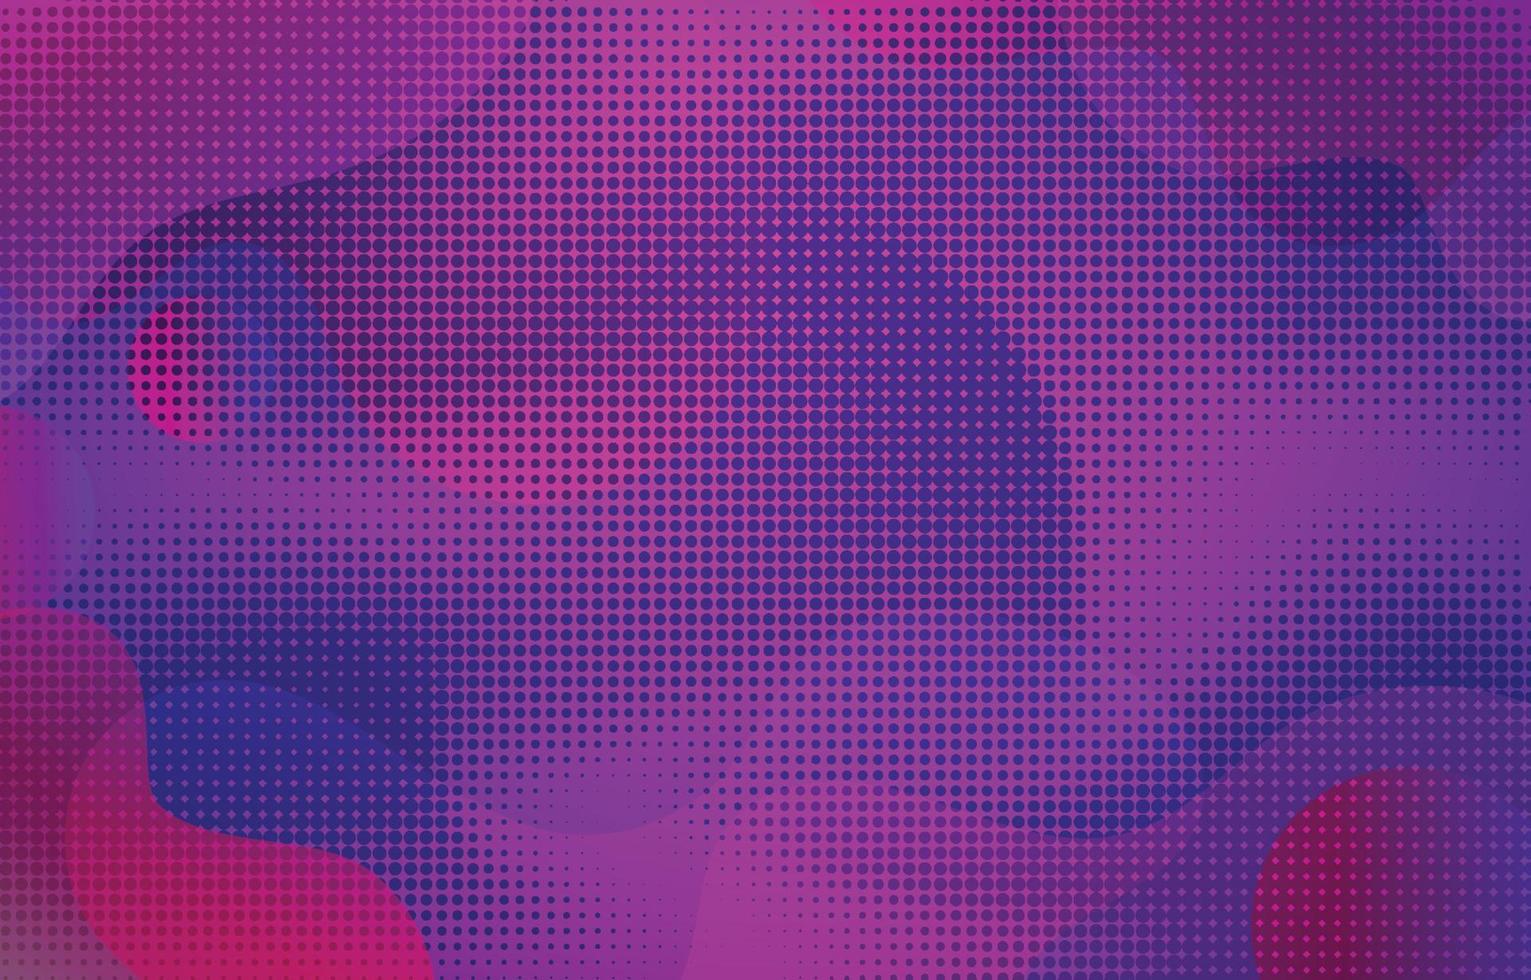 Abstract Halftone Gradient Background vector